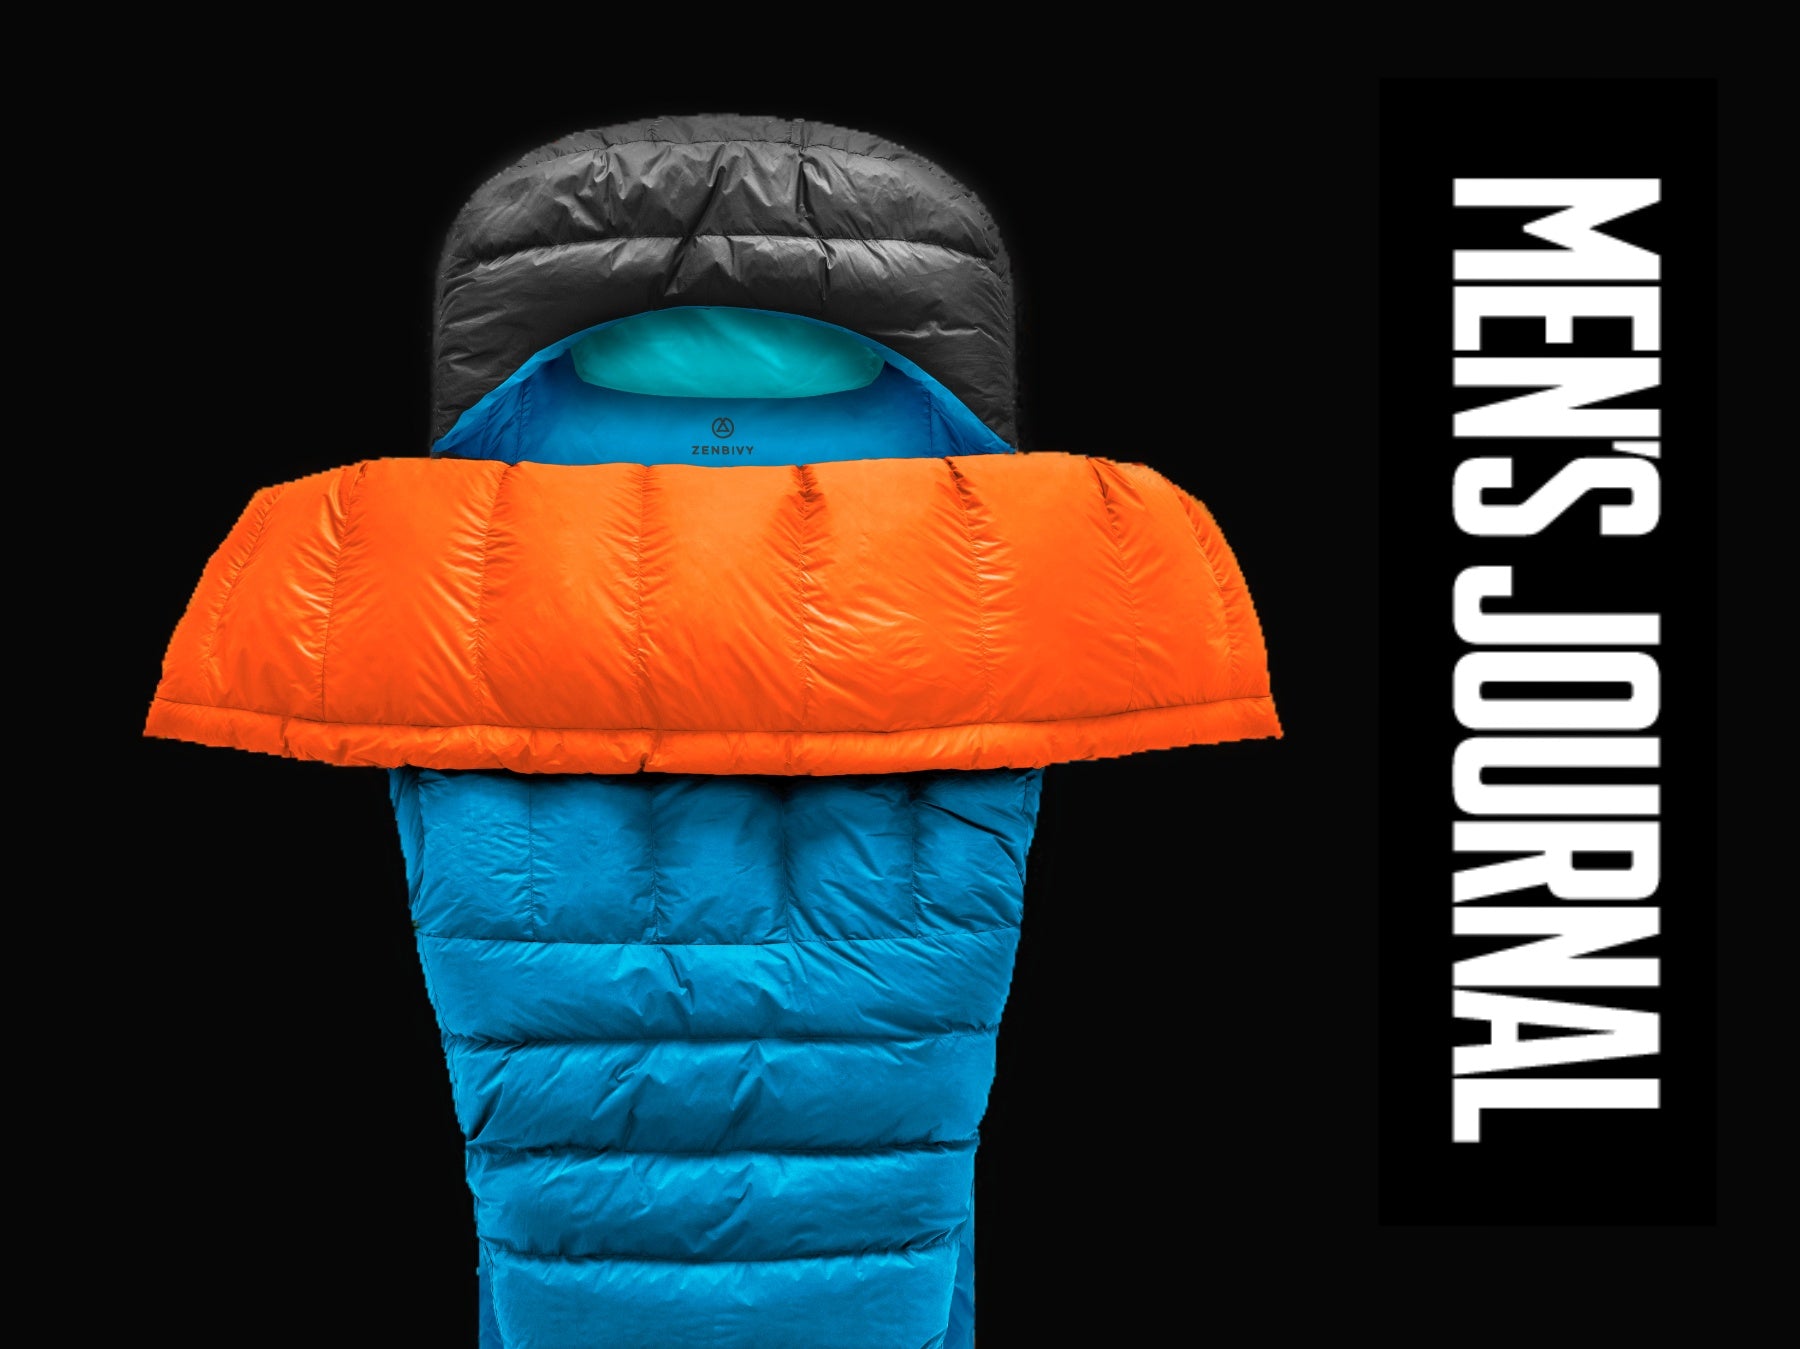 PRESS: "The 10 Best Cold Weather Sleeping Bags"